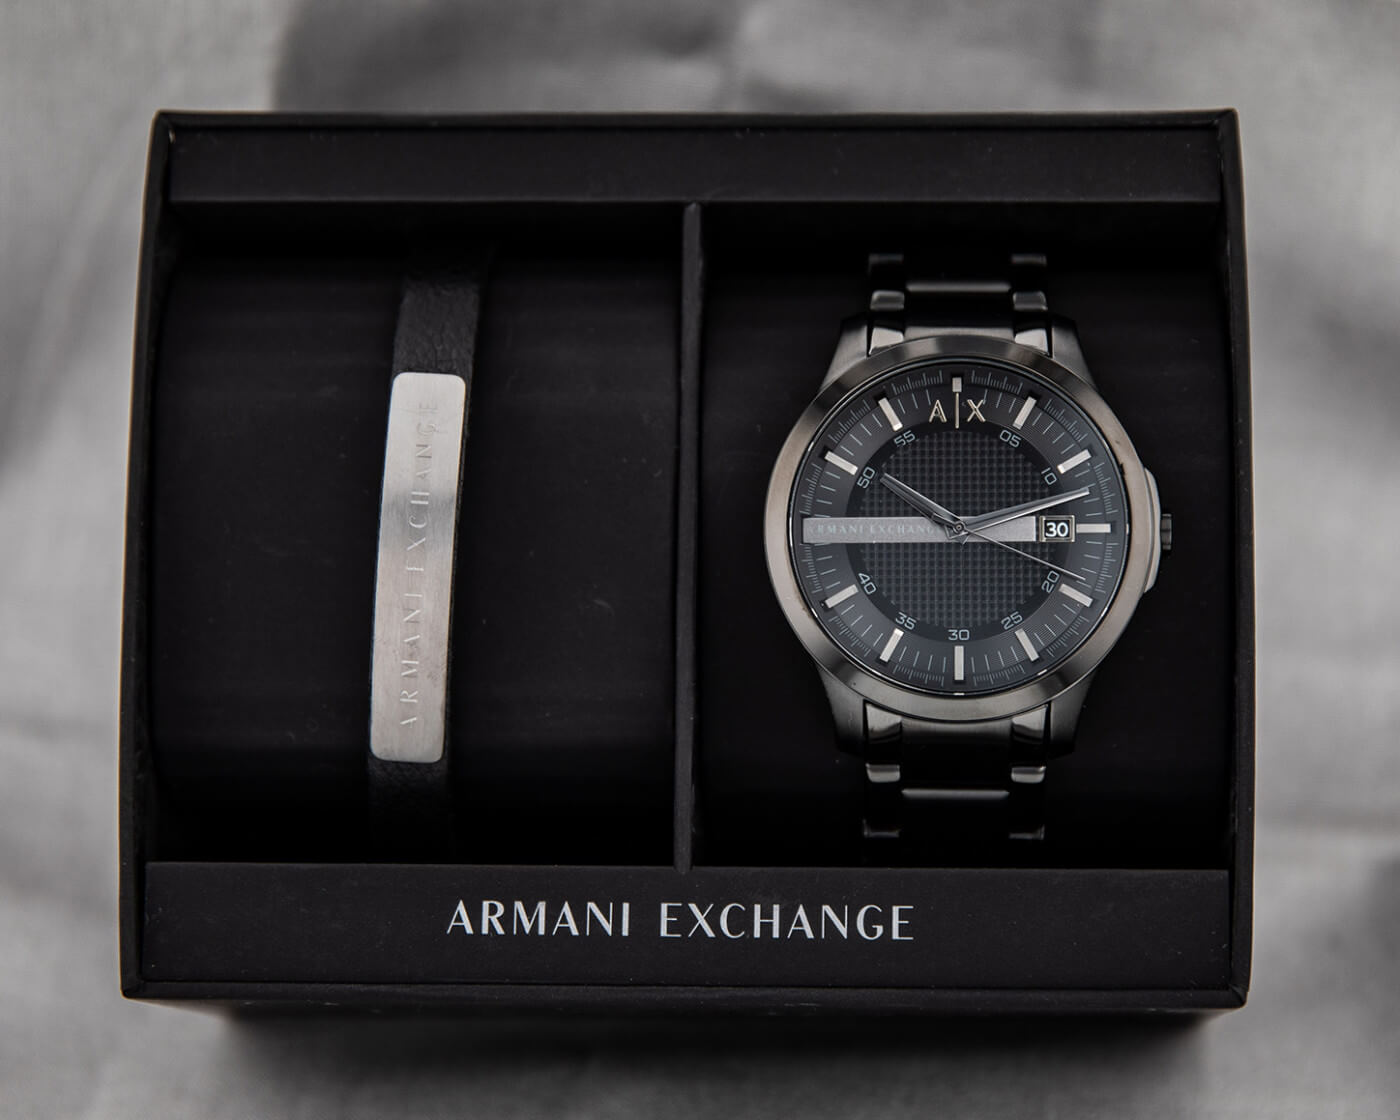 Unboxing the Armani Exchange Hampton Watch and Leather Cuff Box Set